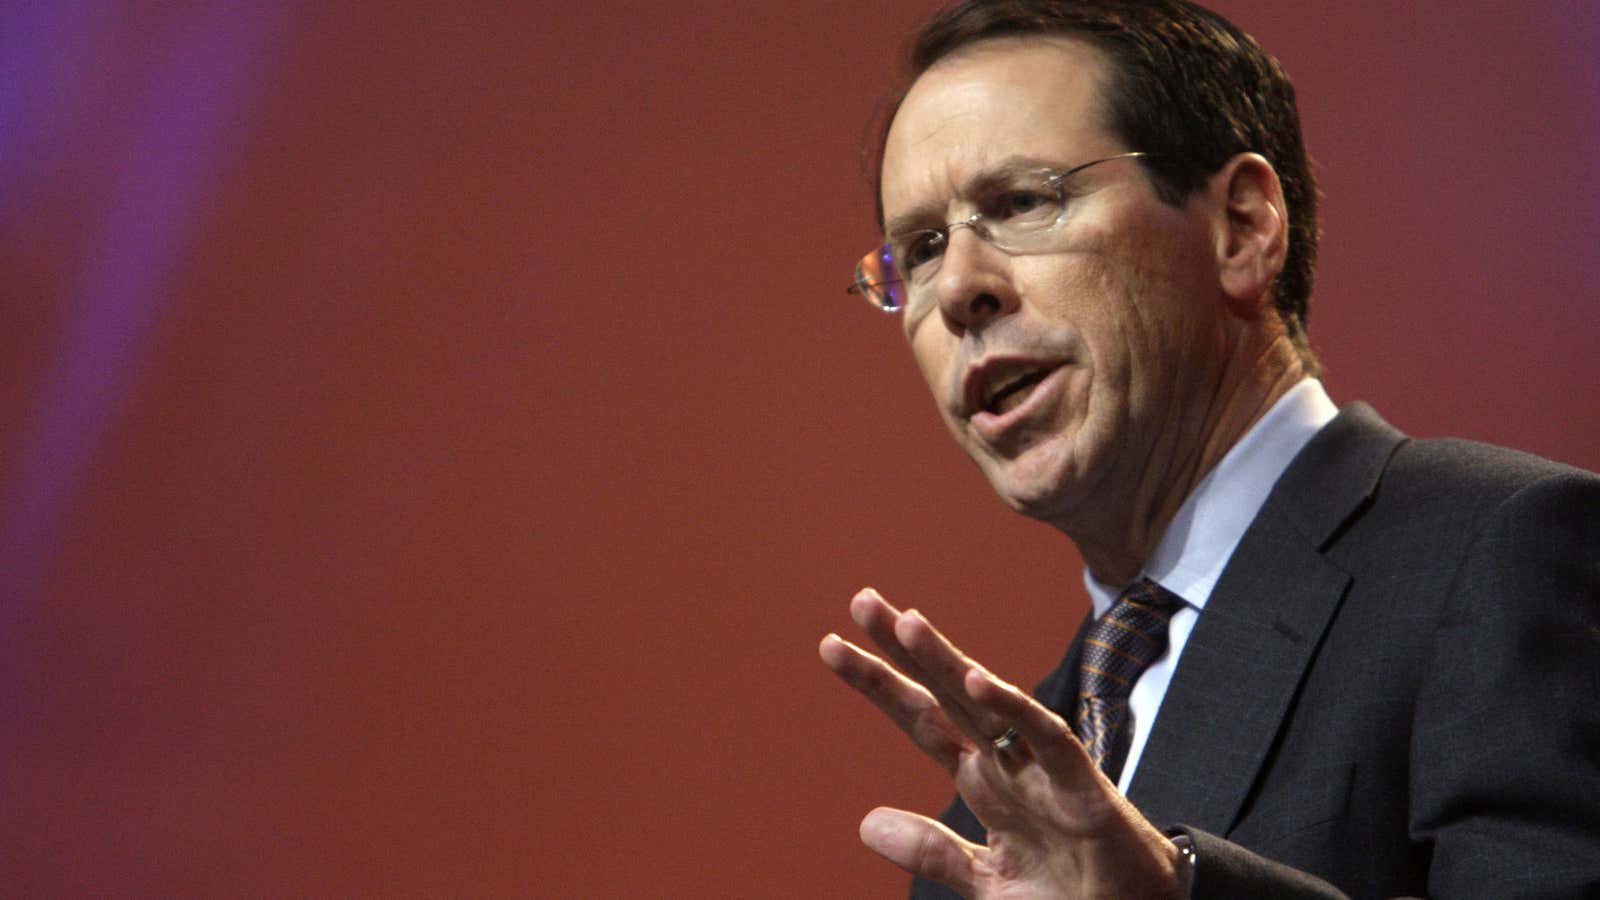 “Tolerance is for cowards” – Randall Stephenson, CEO of AT&amp;T